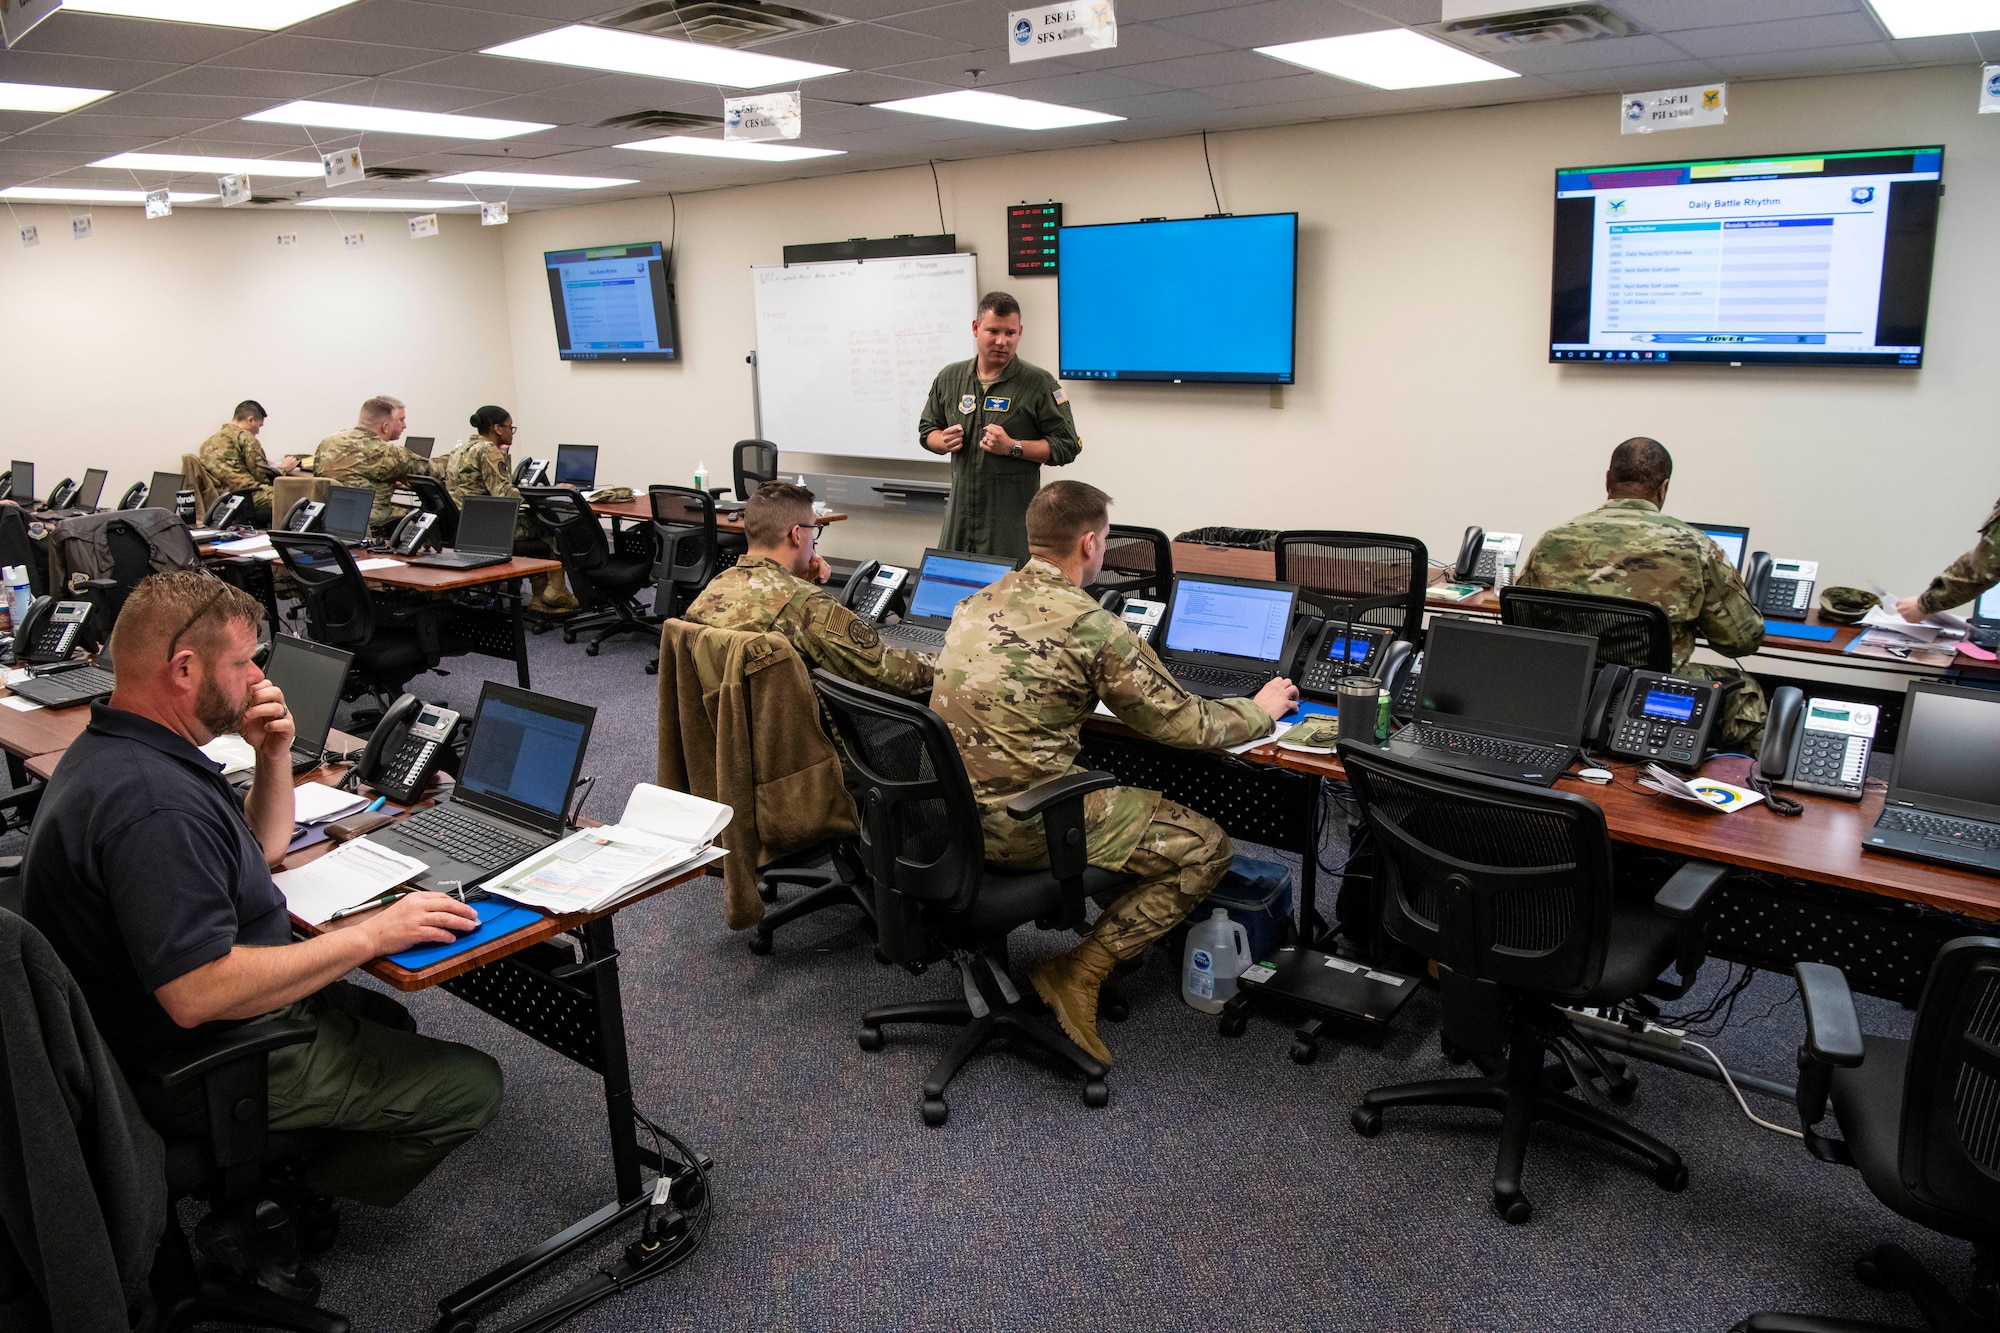 Members of the 436th Airlift Wing Crisis Battle Staff work on Dover Air Force Base’s response to COVID-19 March 16, 2020, at Dover AFB, Delaware. The team is committed to protecting the health of our communities and will continue to monitor and assess the situation. (U.S. Air Force photo by Senior Airman Christopher Quail) (This photo has been altered for security purposes)